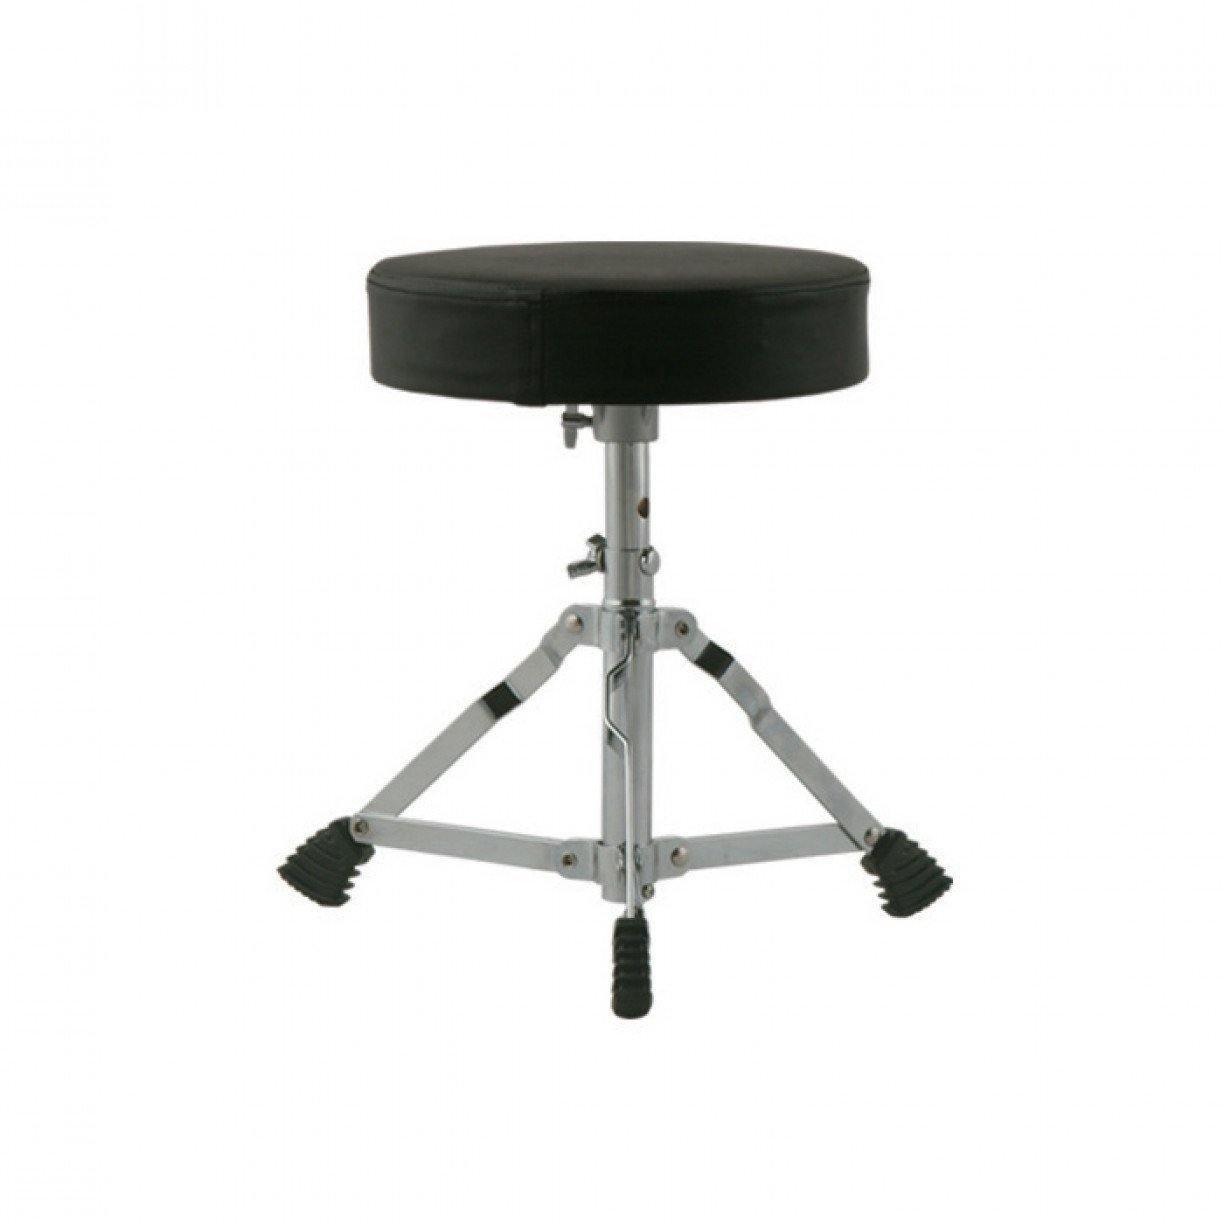 Junior Drum Throne - Drums & Percussion - Drum Hardware & Parts by DXP at Muso's Stuff